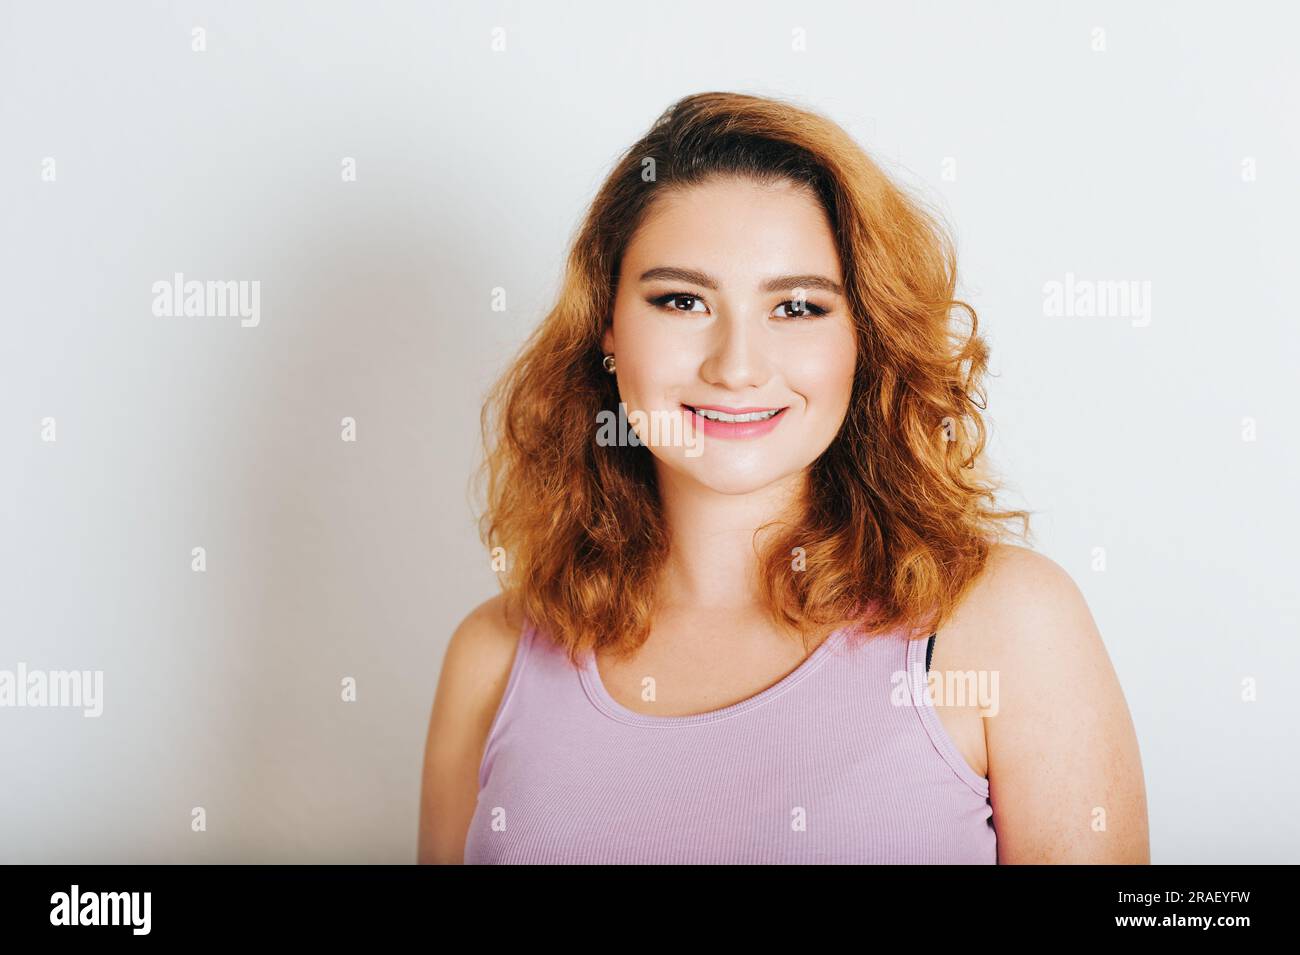 Studio shot of young 20-25 year old woman, bright red hair, pink lipstick Stock Photo